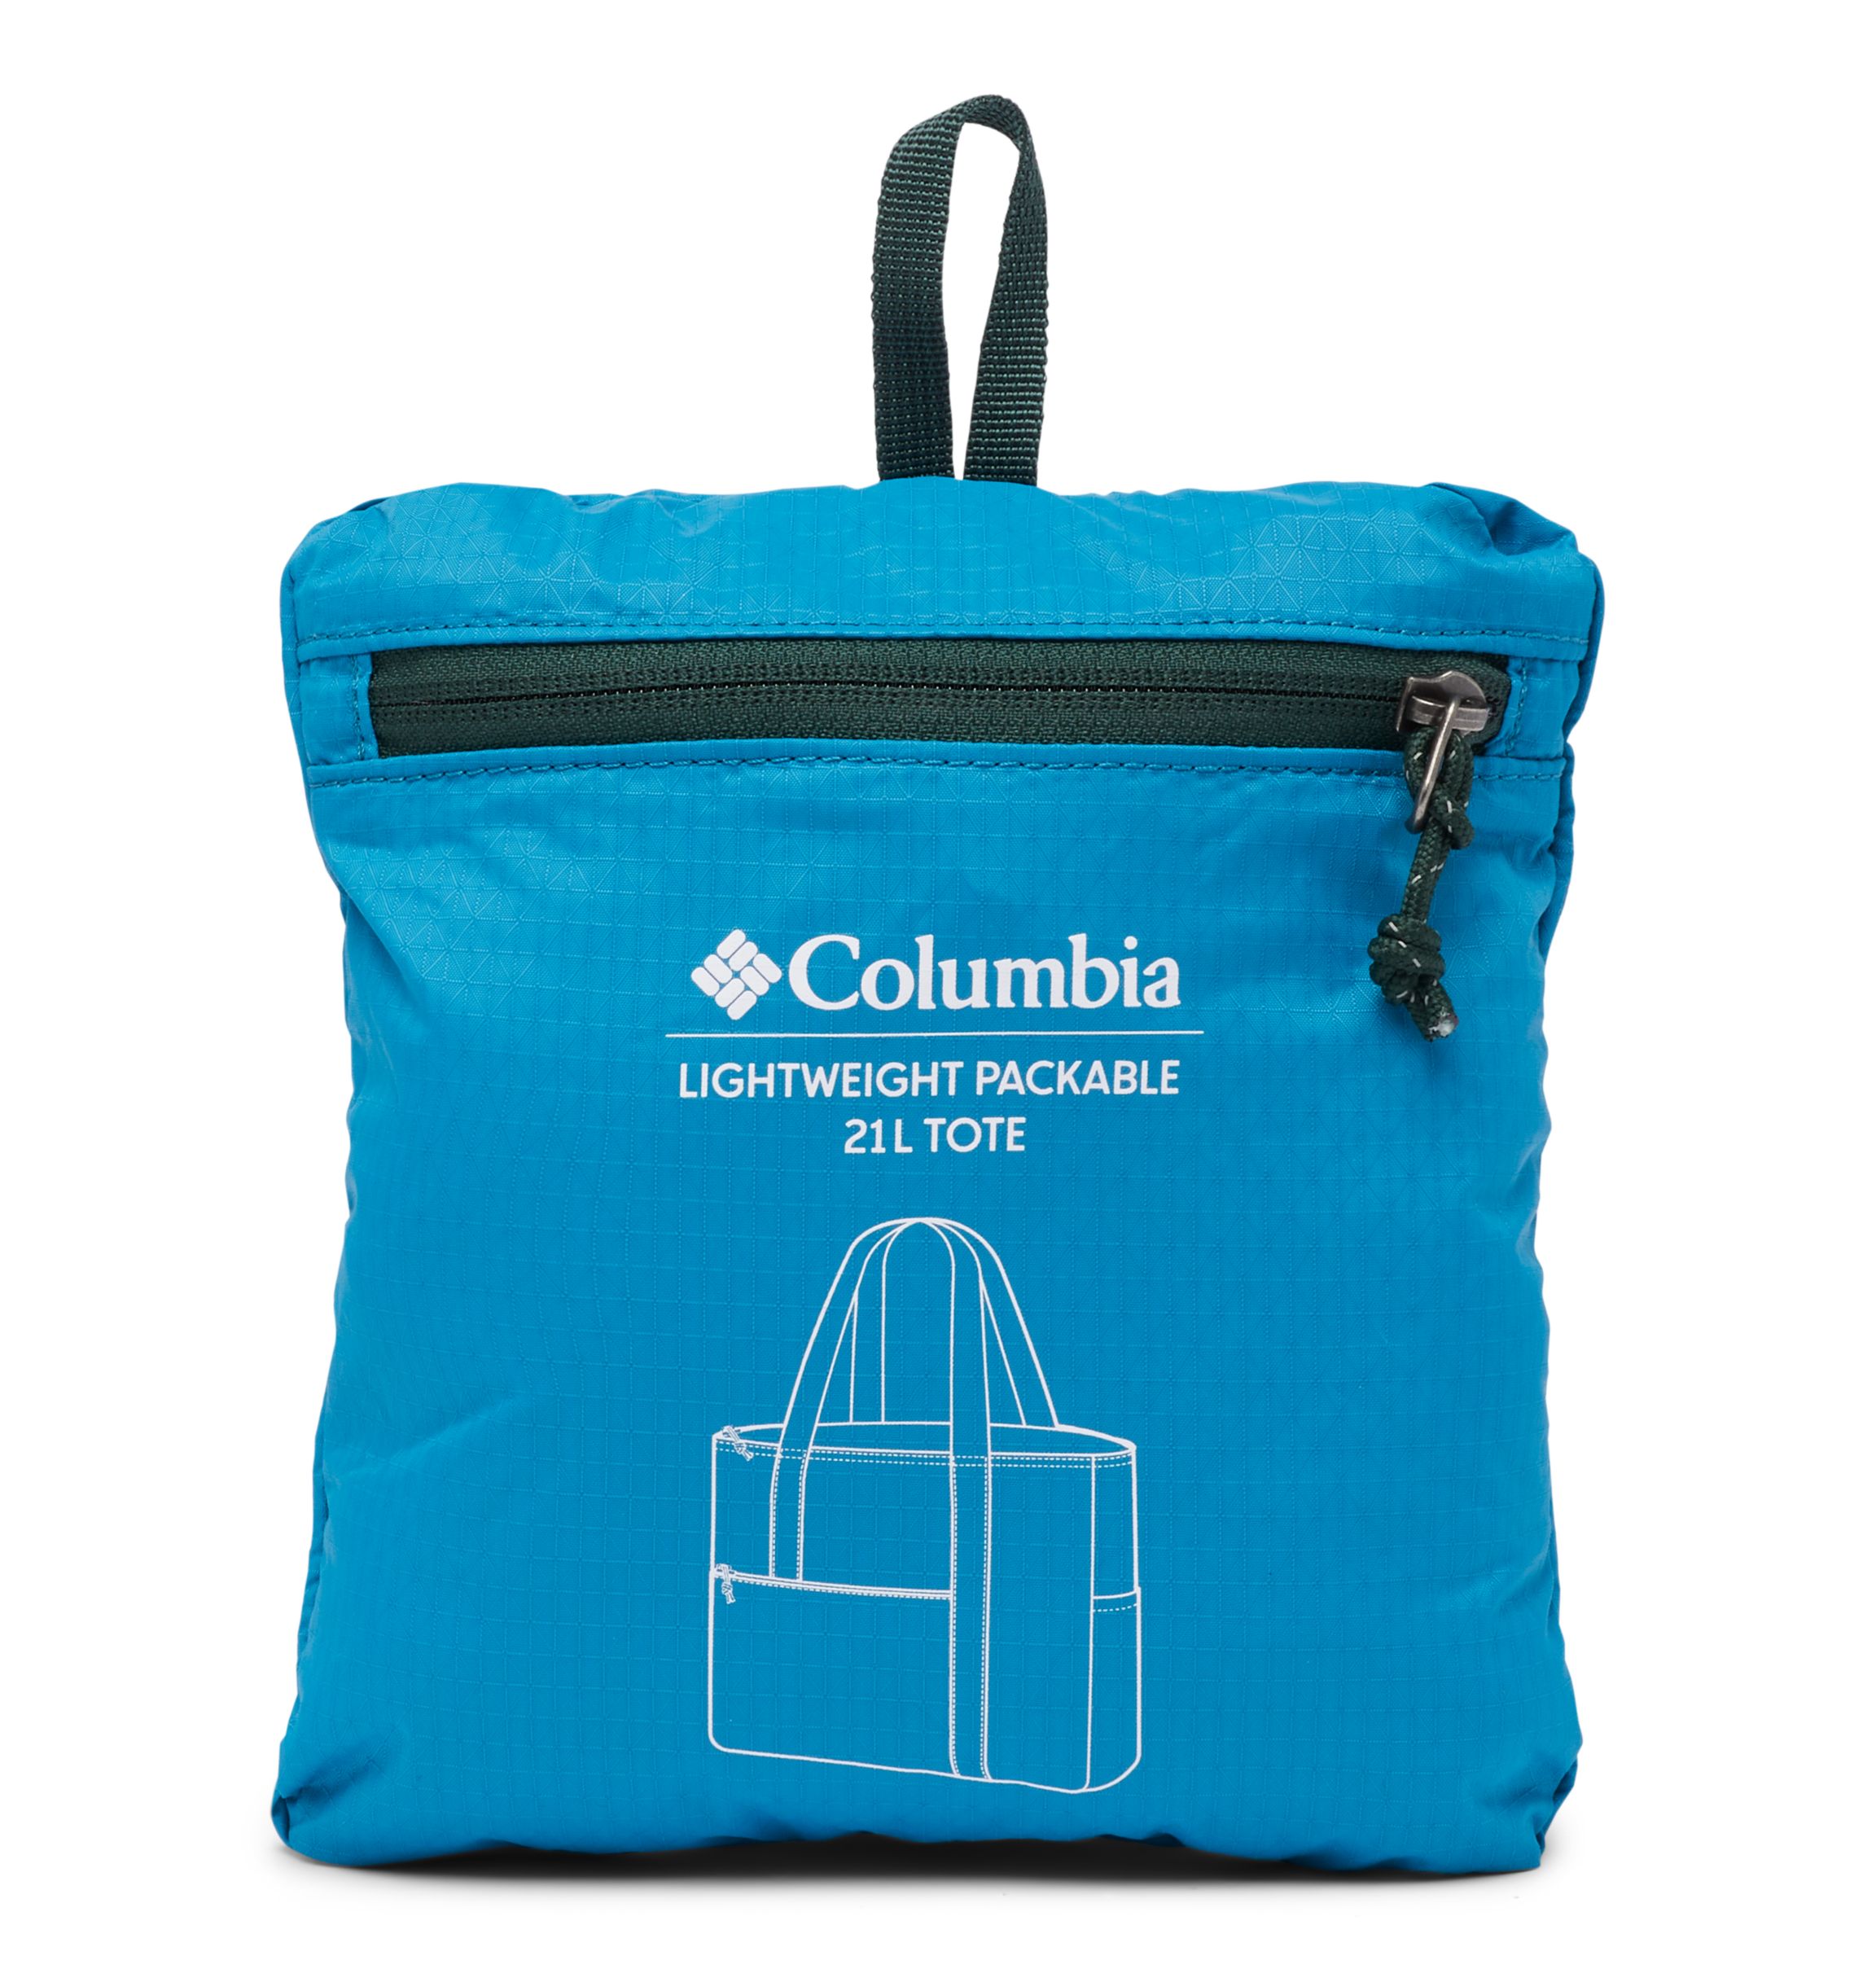 Columbia unisex-adult Lightweight Packable 21l Tote 